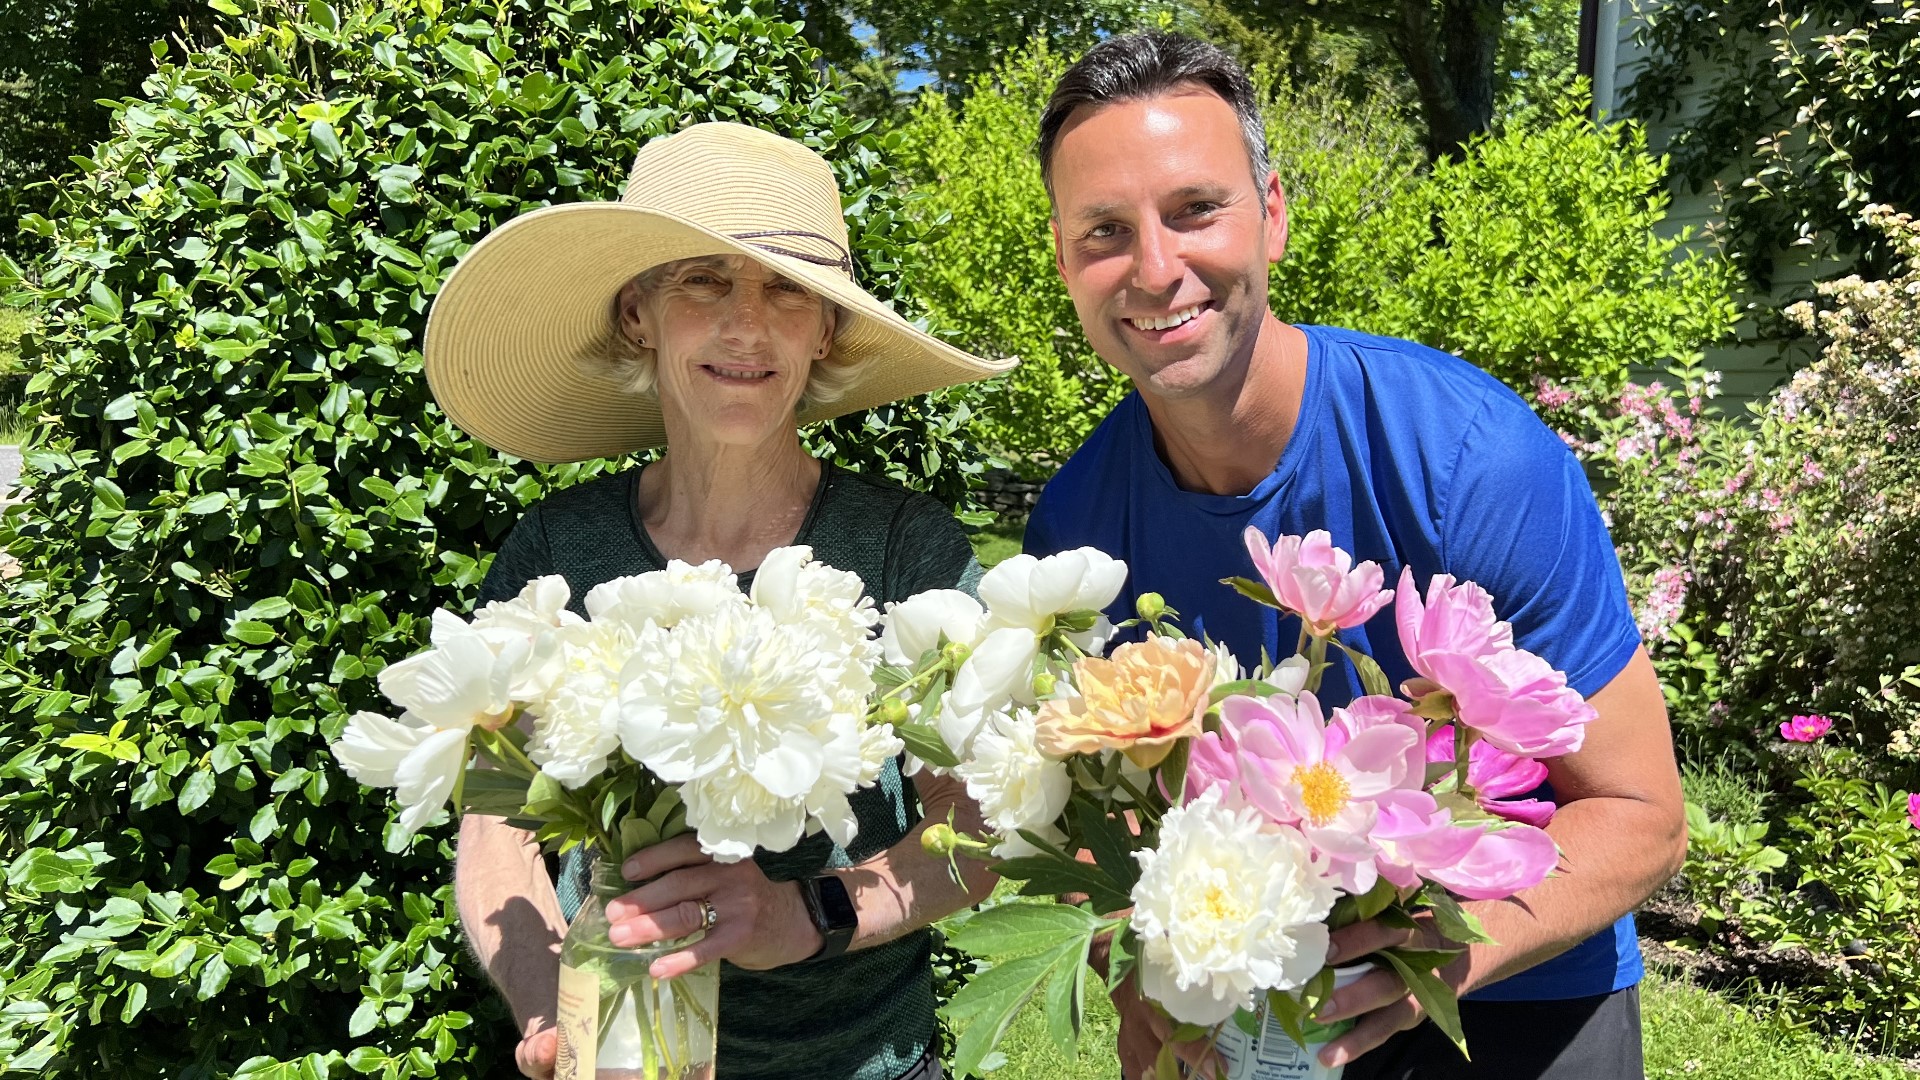 Gardening with Gutner talks with Joan Benoit Samuelson about being a master gardener as she gives a tour of her flower and vegetable gardens.